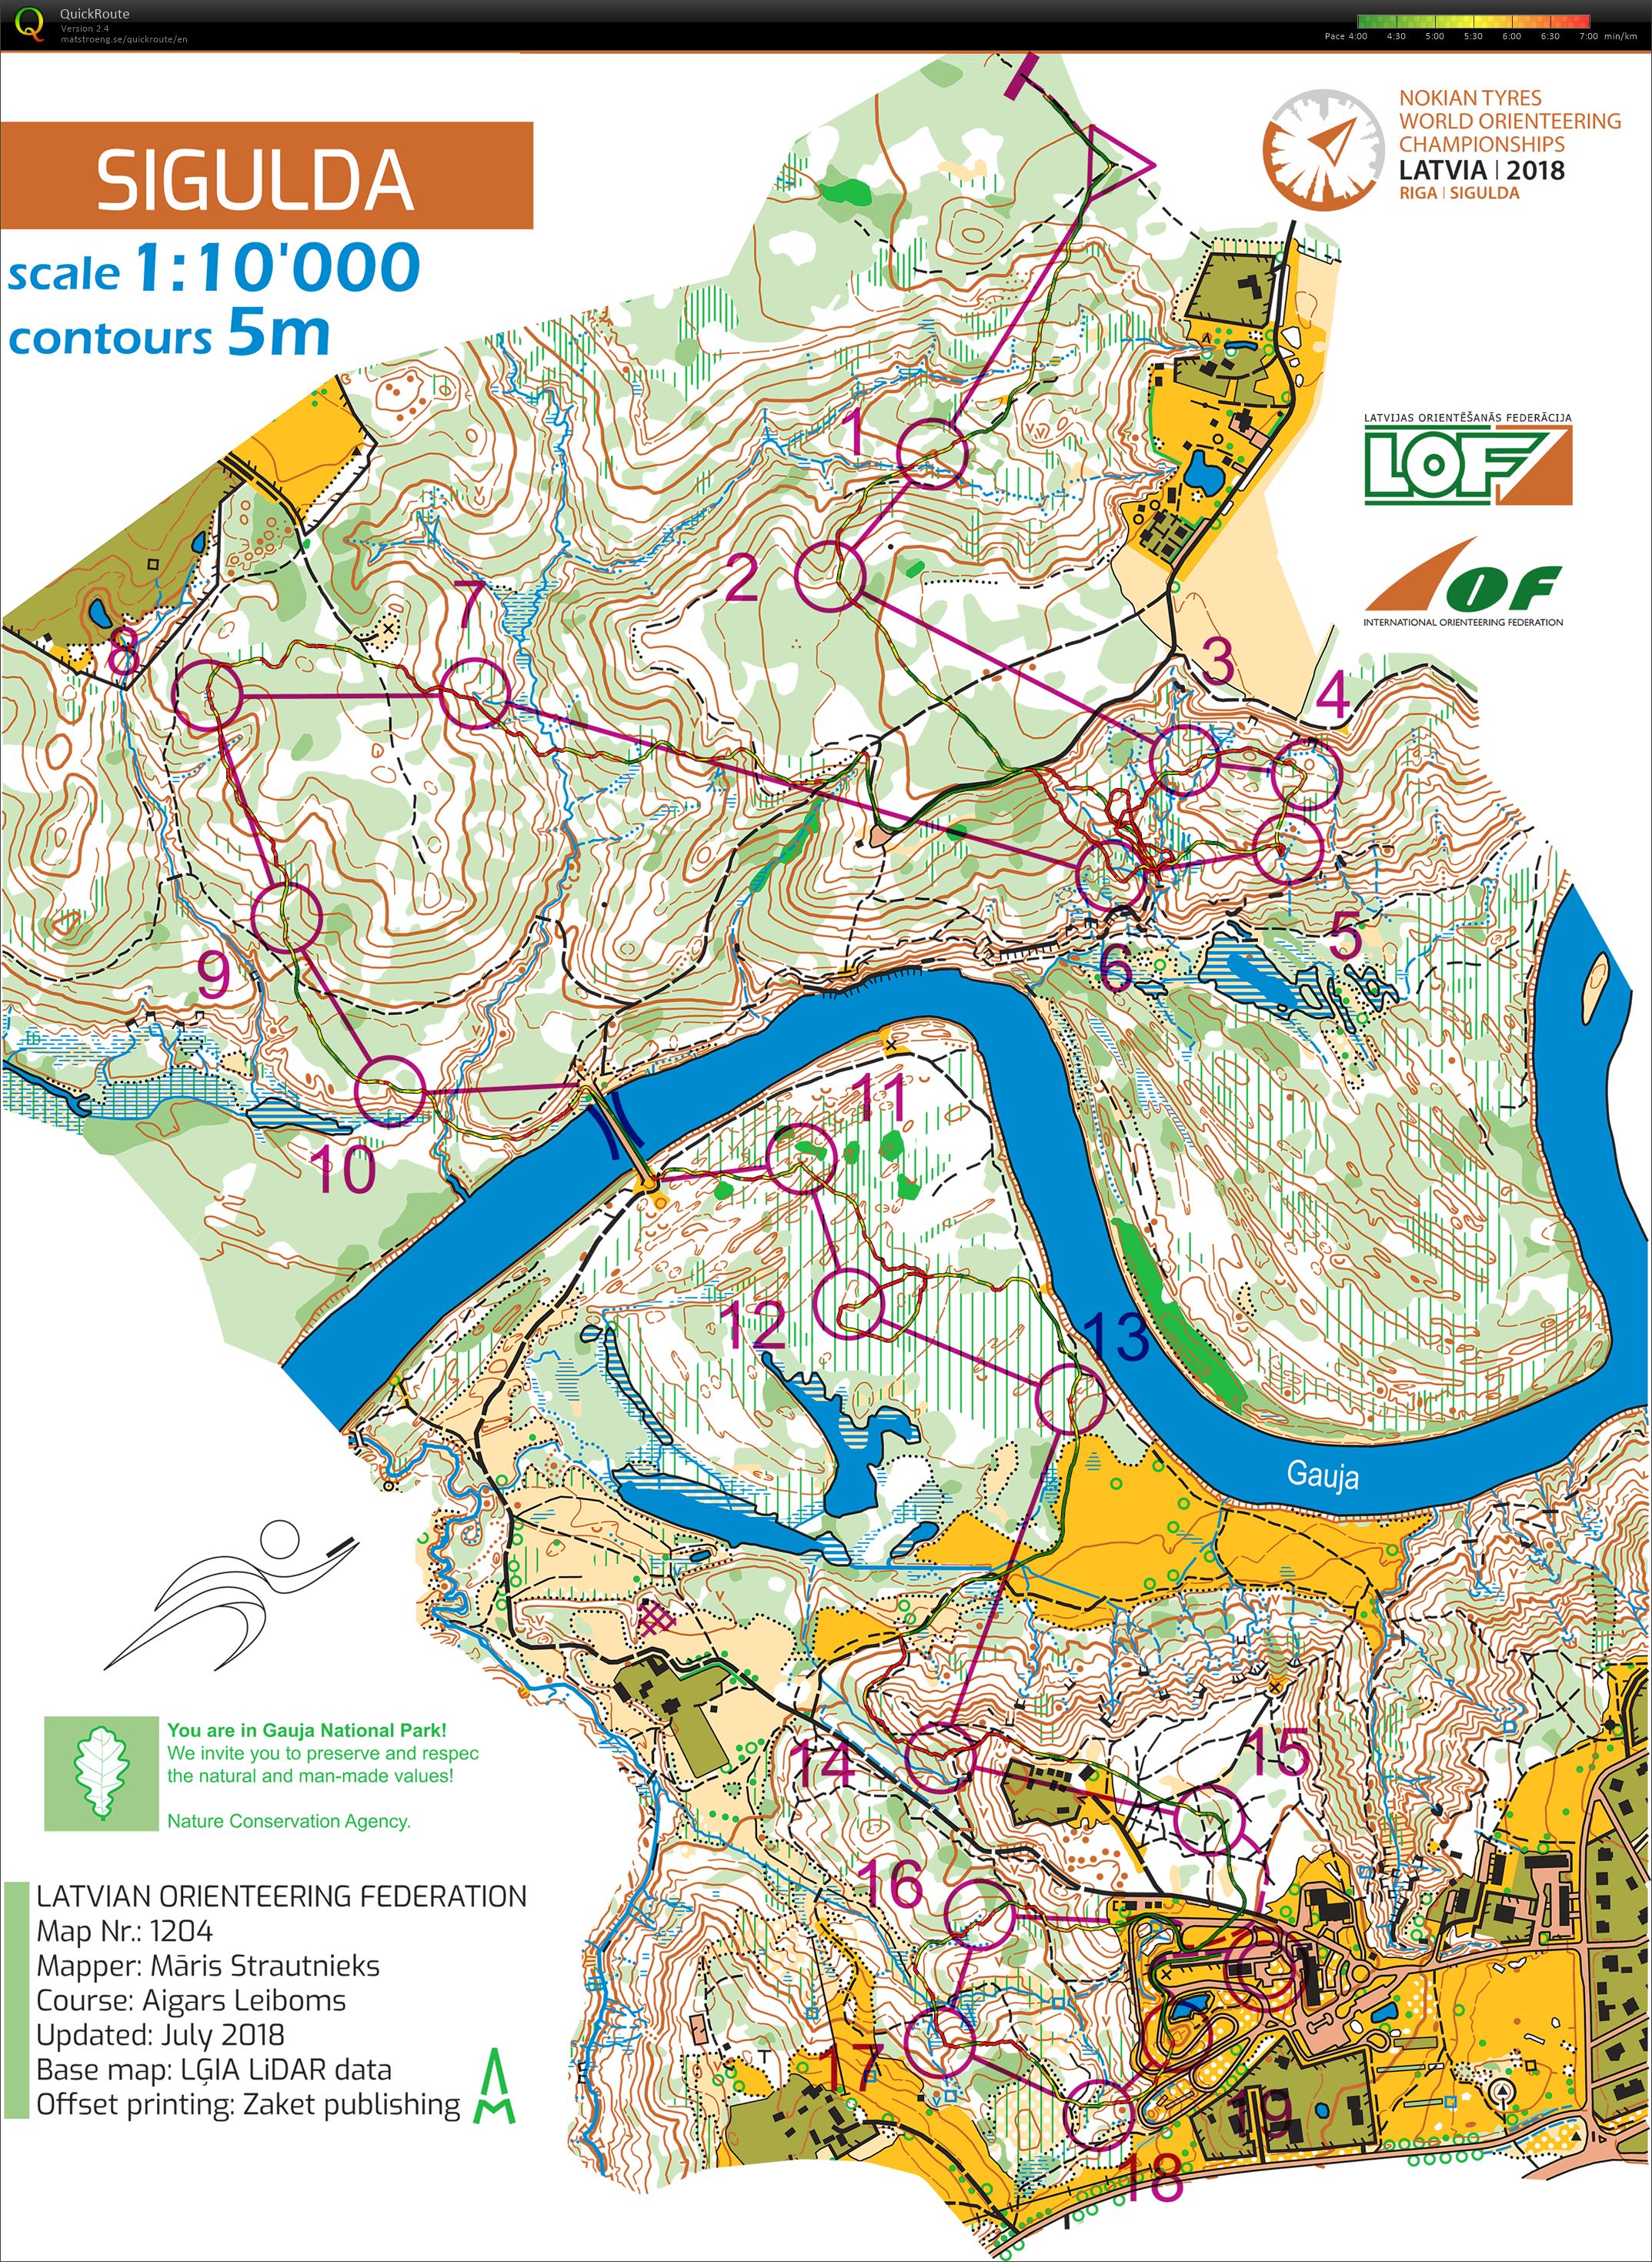 WOC 2018 Middle (2018-08-07)